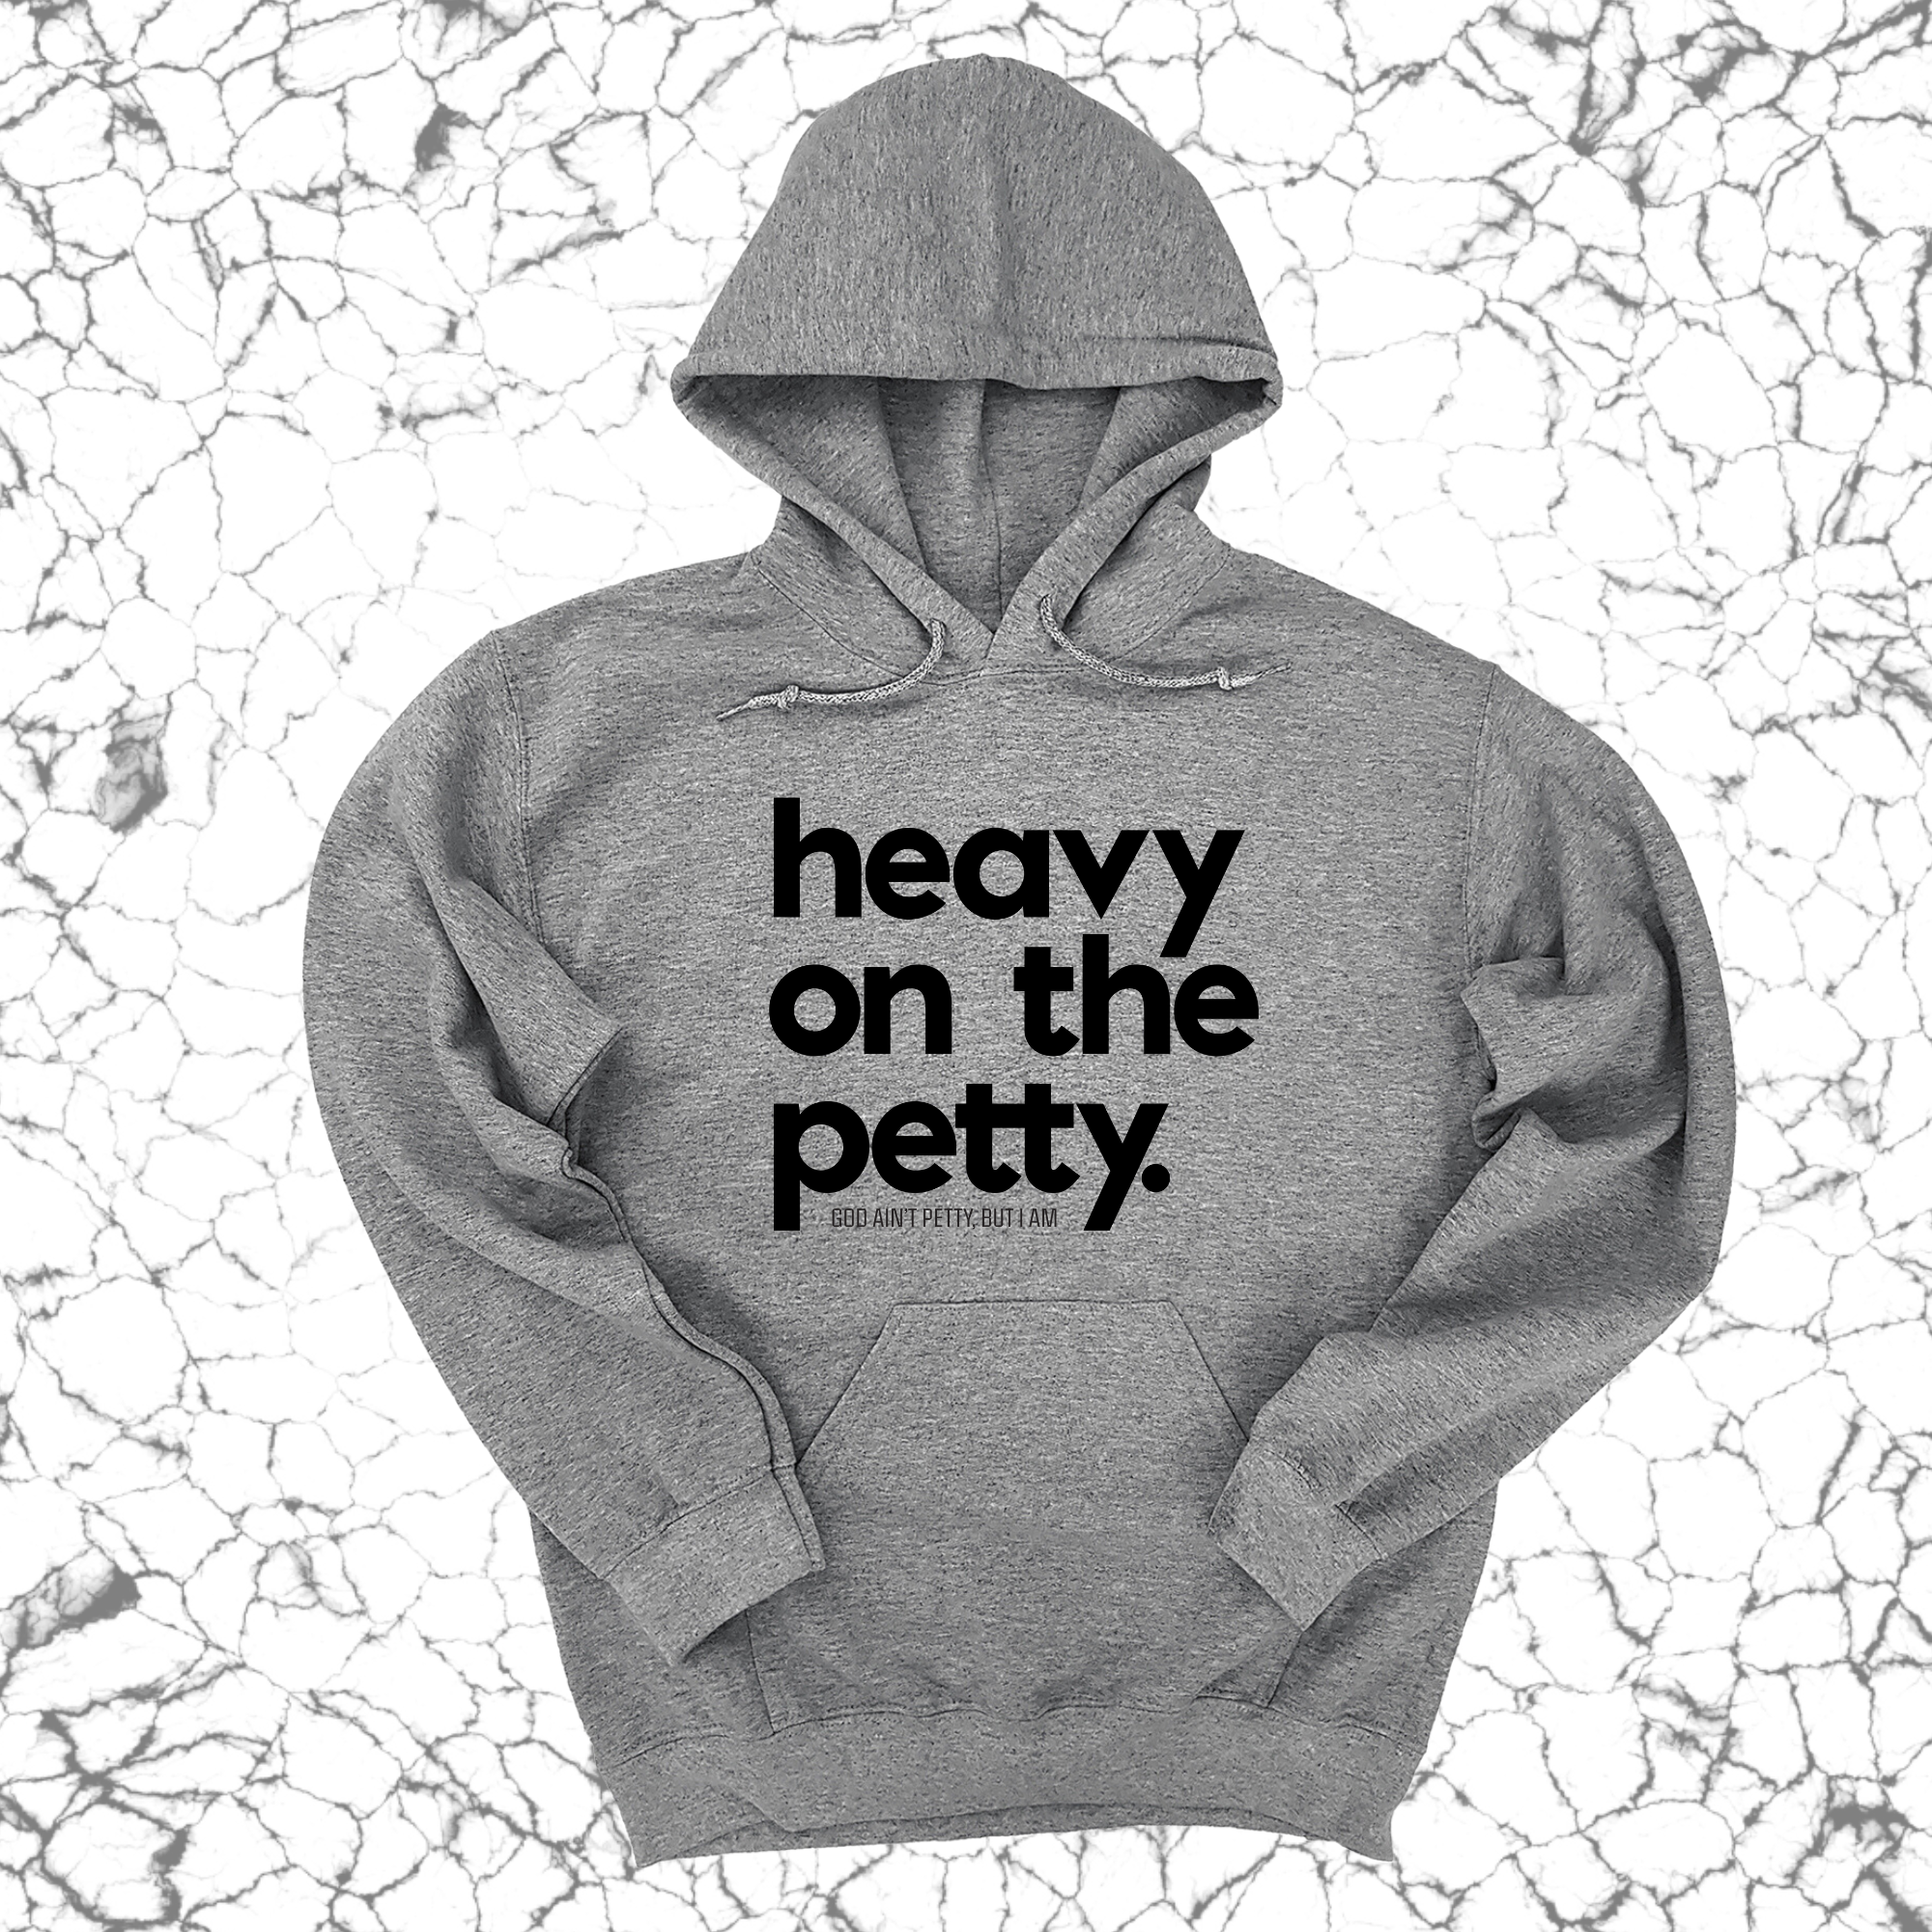 Heavy on the Petty Unisex Hoodie-Hoodie-The Original God Ain't Petty But I Am